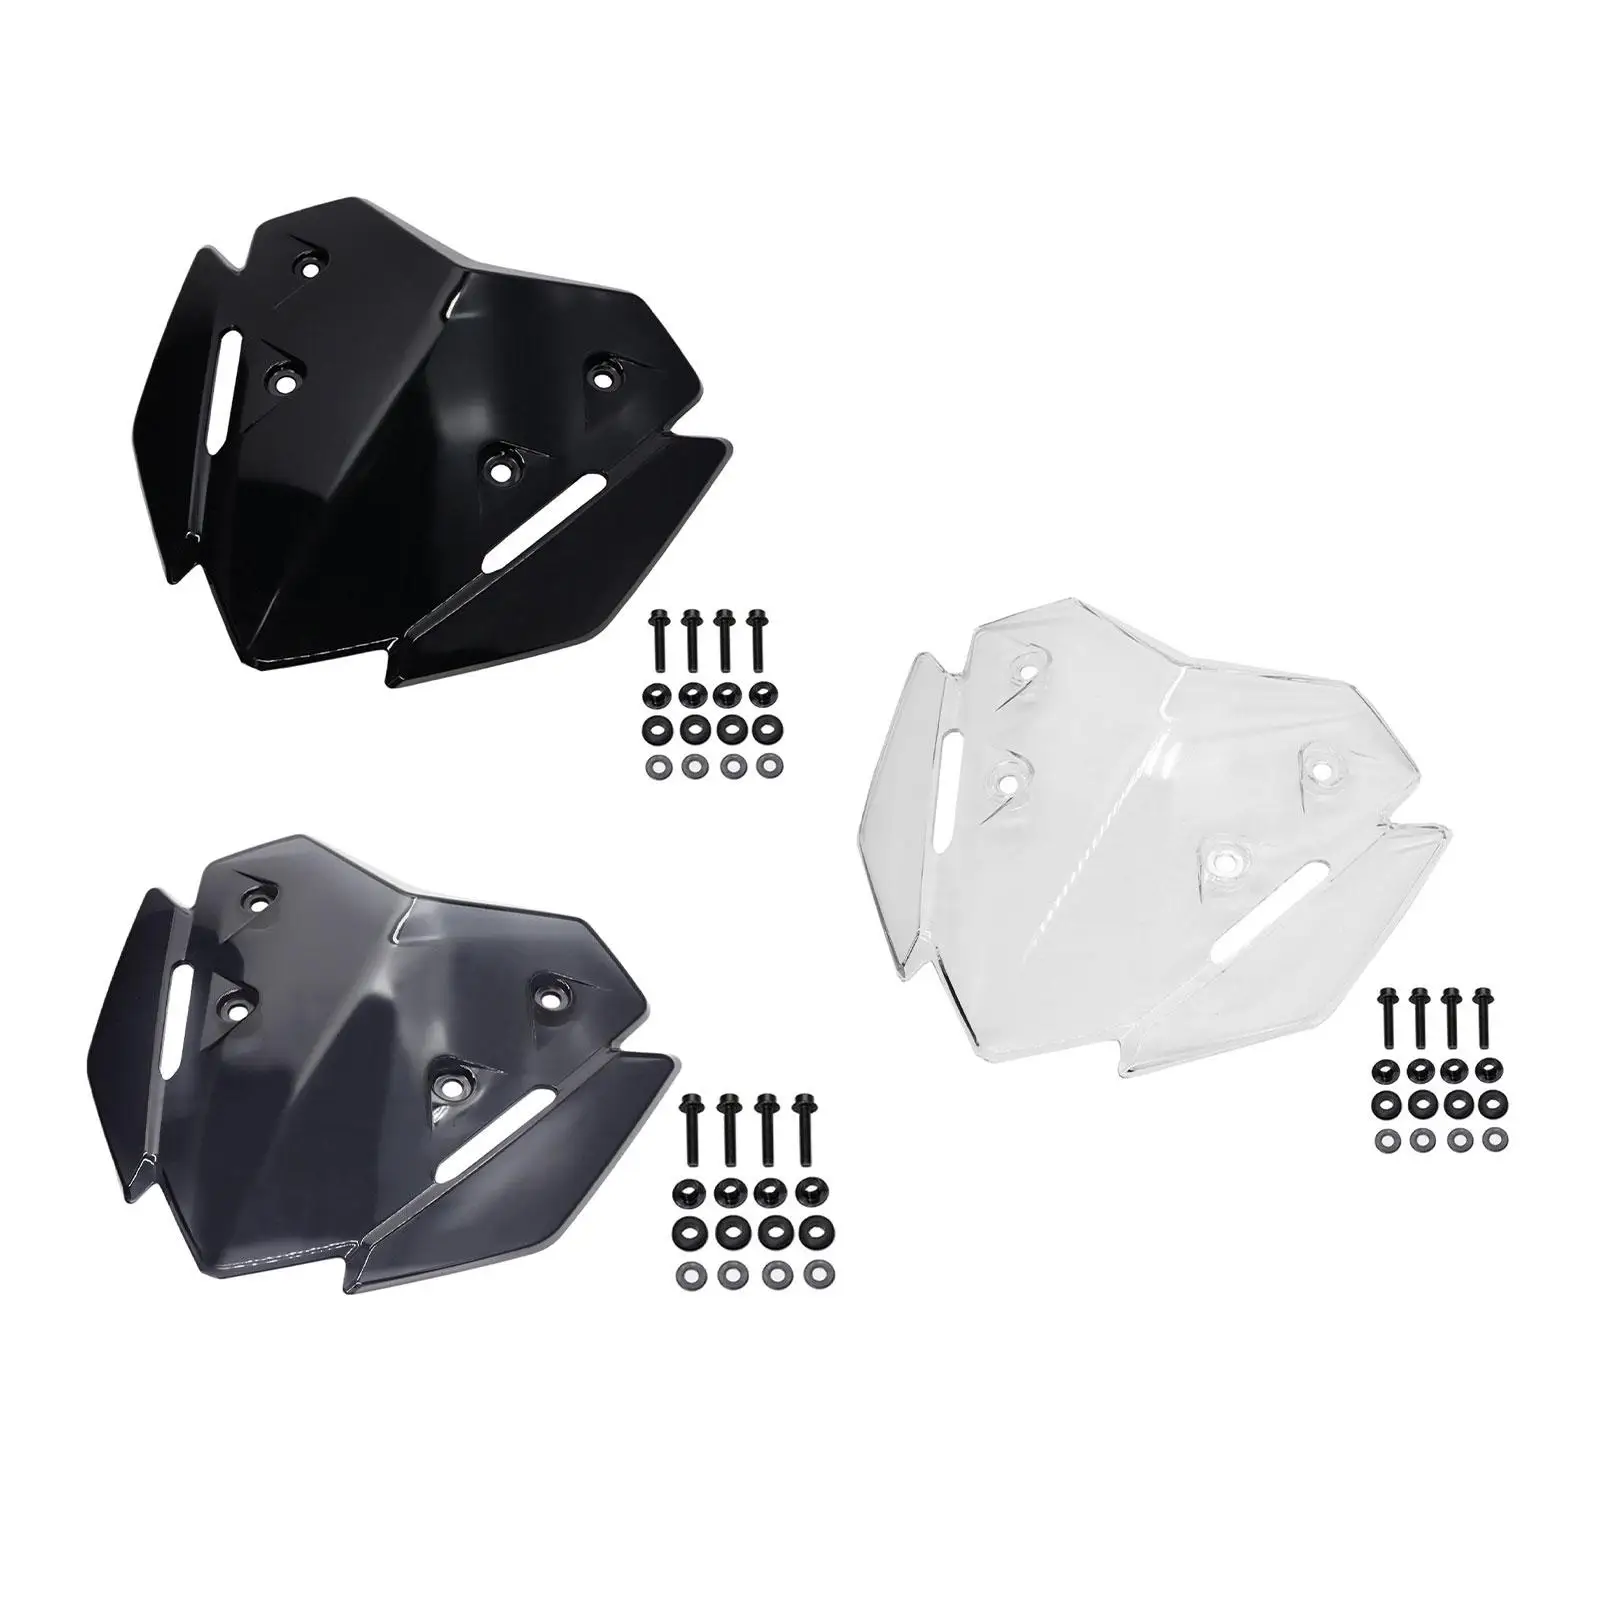 Windshield Spare Parts for Xmax125 Xmax250 Xmax300 Lightweight Stylish